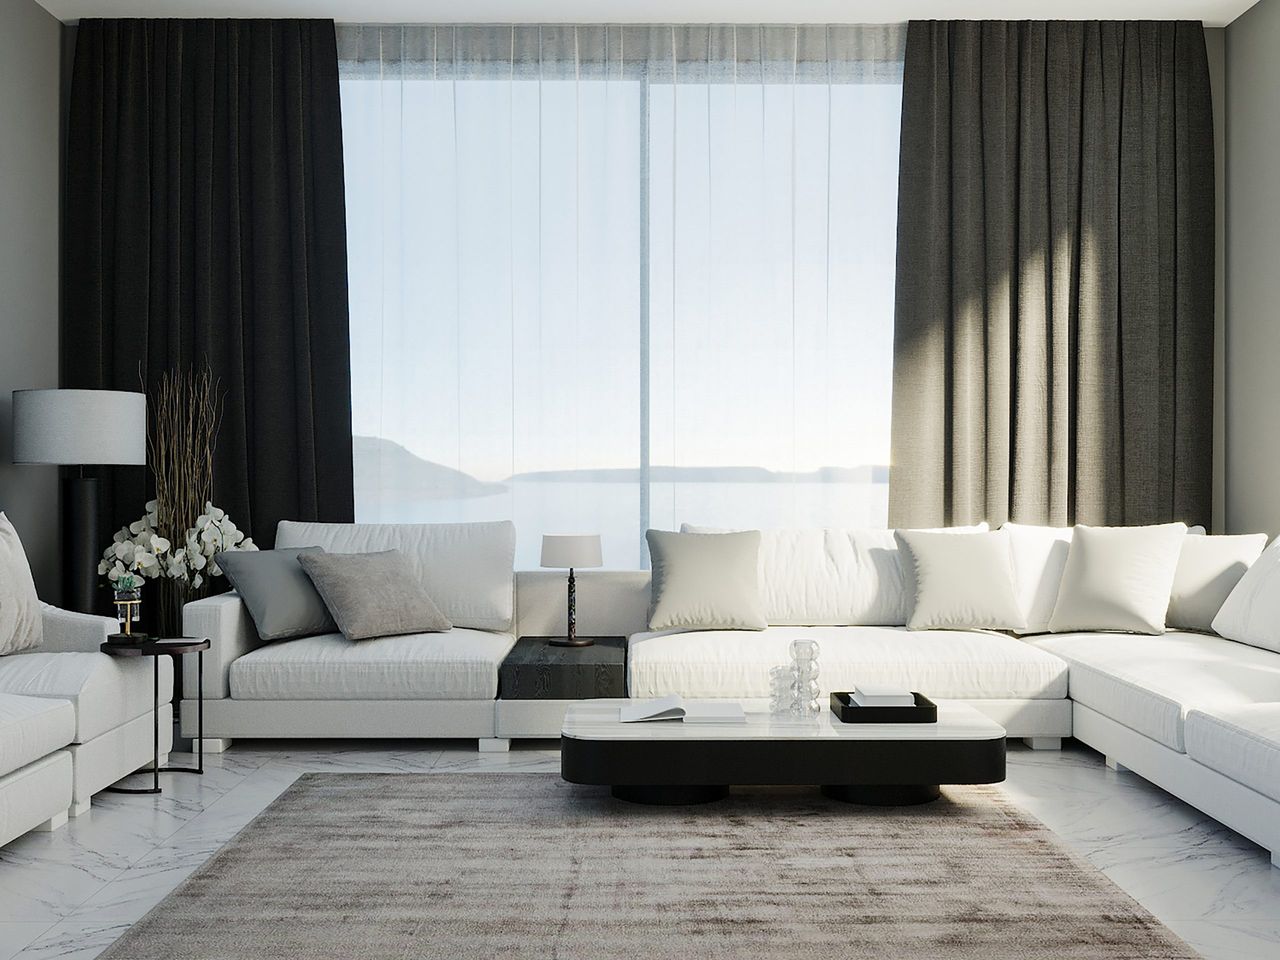 White corner sofa in luxury living guest room with black curtains and window on background, living room mock up, 3d rendering